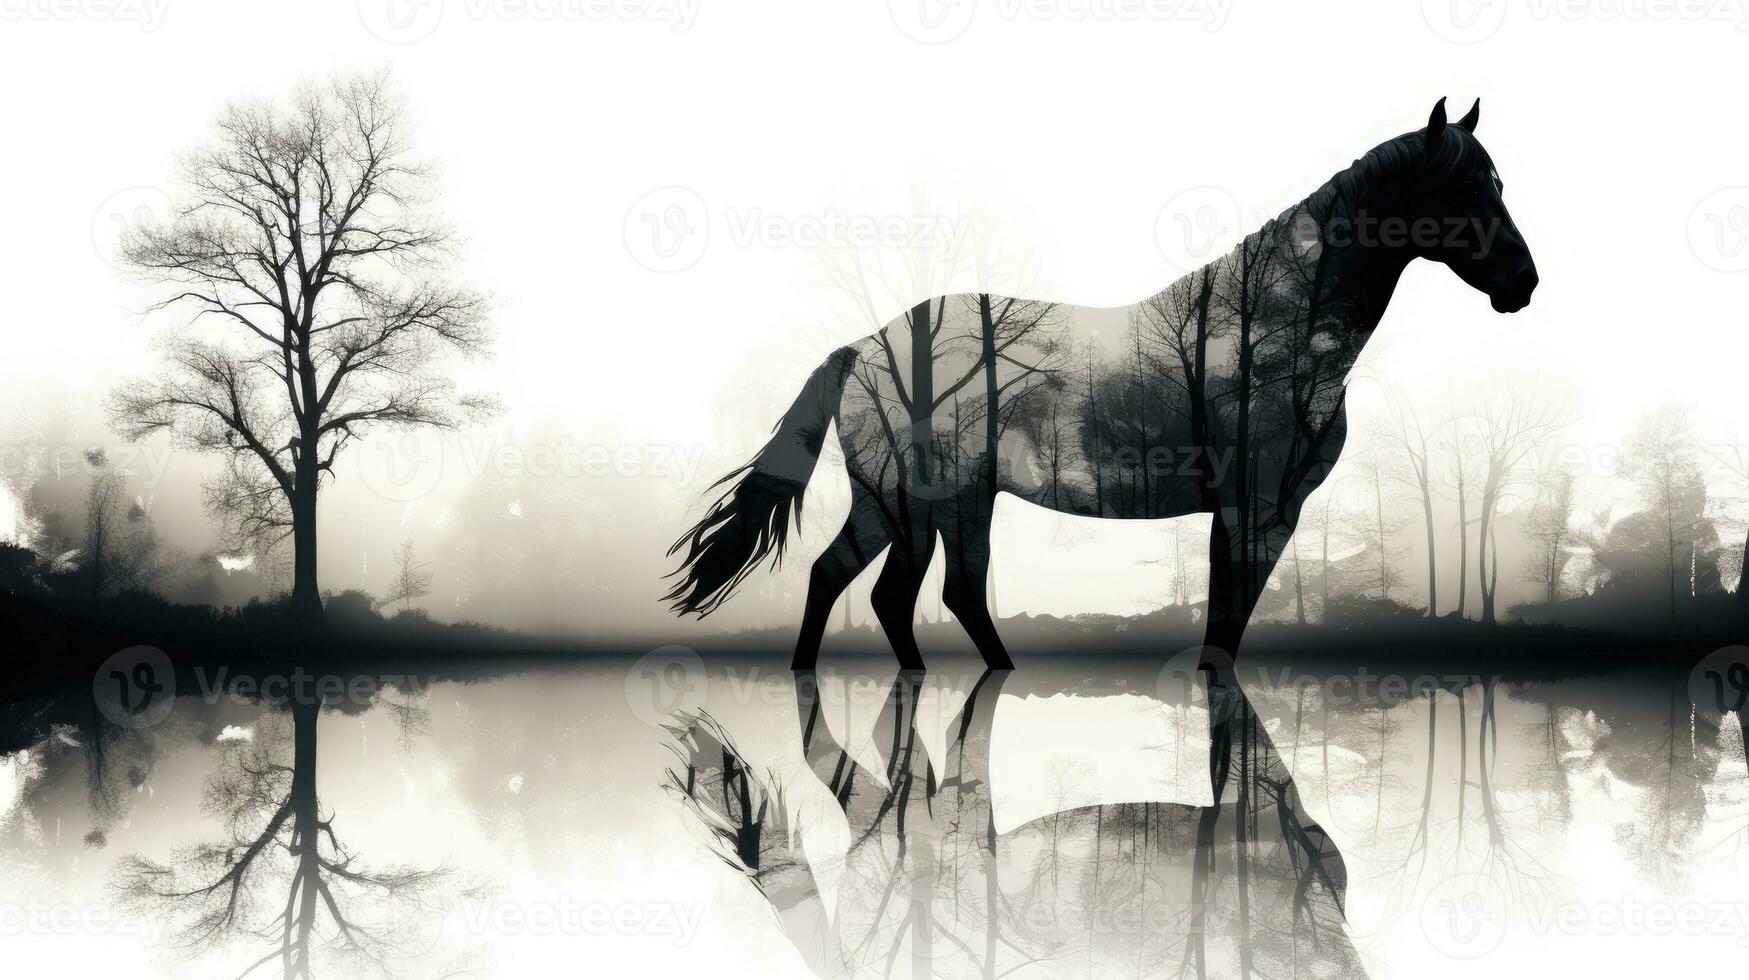 Black and white double exposure merging horse and trees to showcase their connection in nature photo